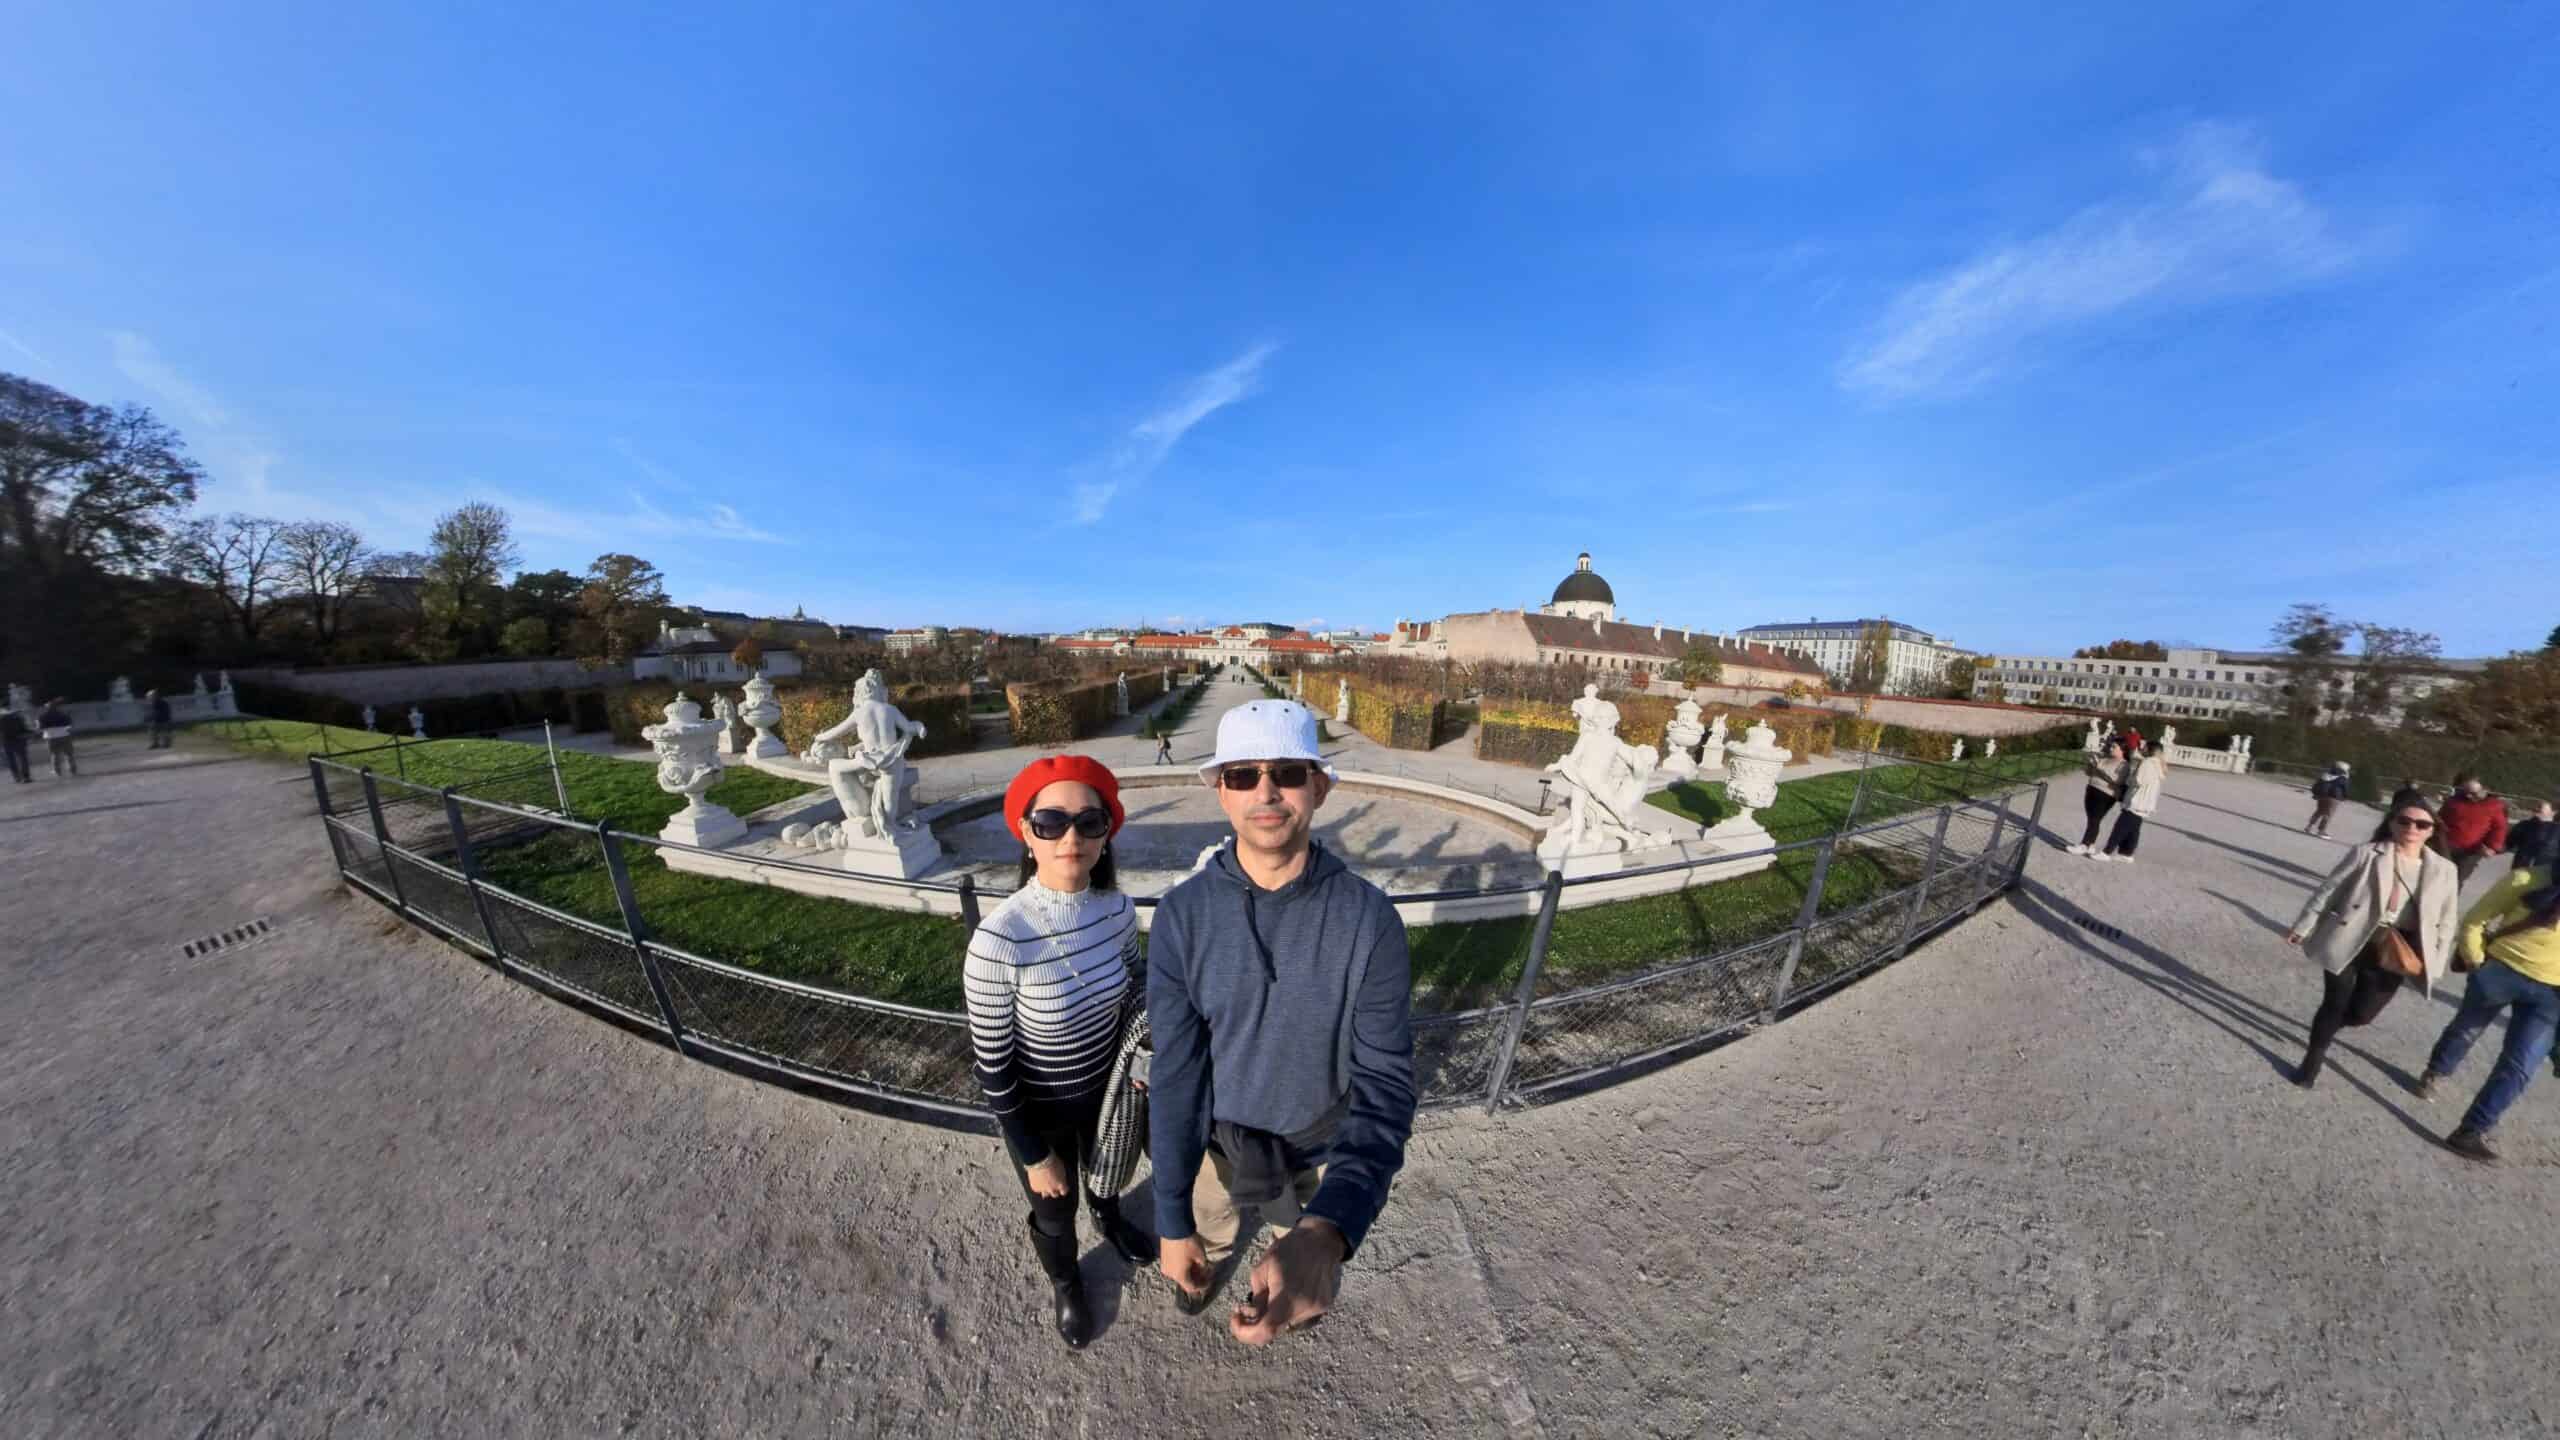 Belvedere Palace Gardens in Vienna wide angle photo taken with Insta360 camera on an invisible selfie stick